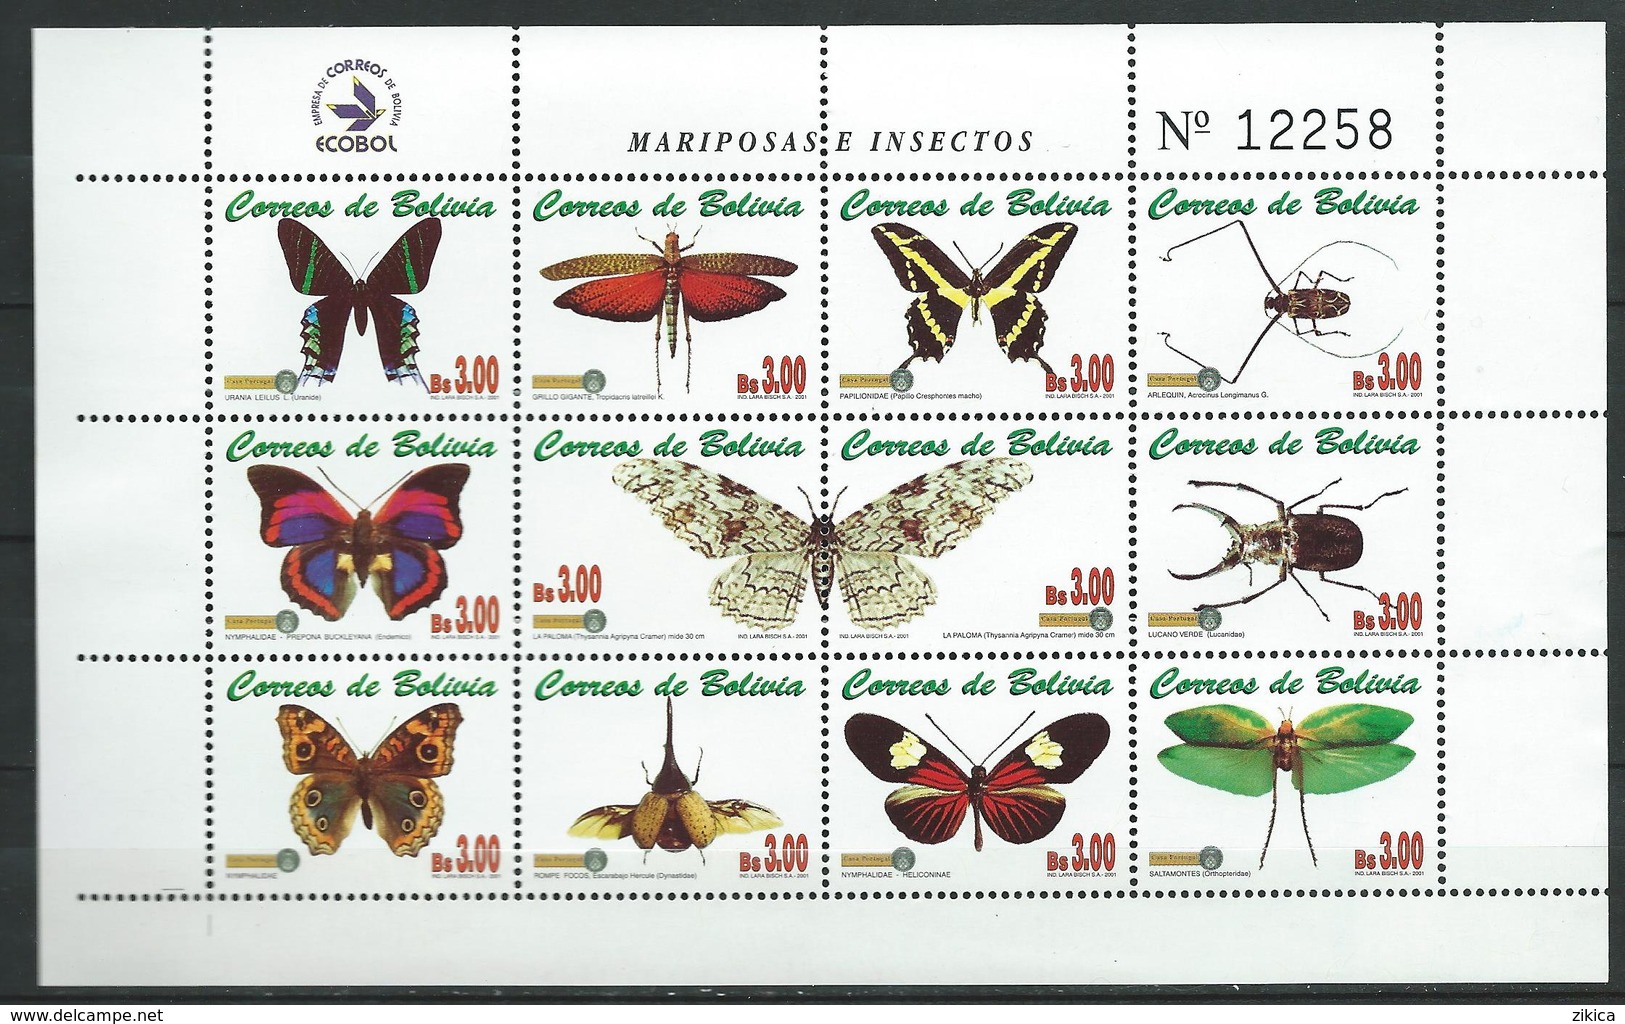 Bolivia 2002 Butterflies And Insects.M/S. MNH - Bolivia